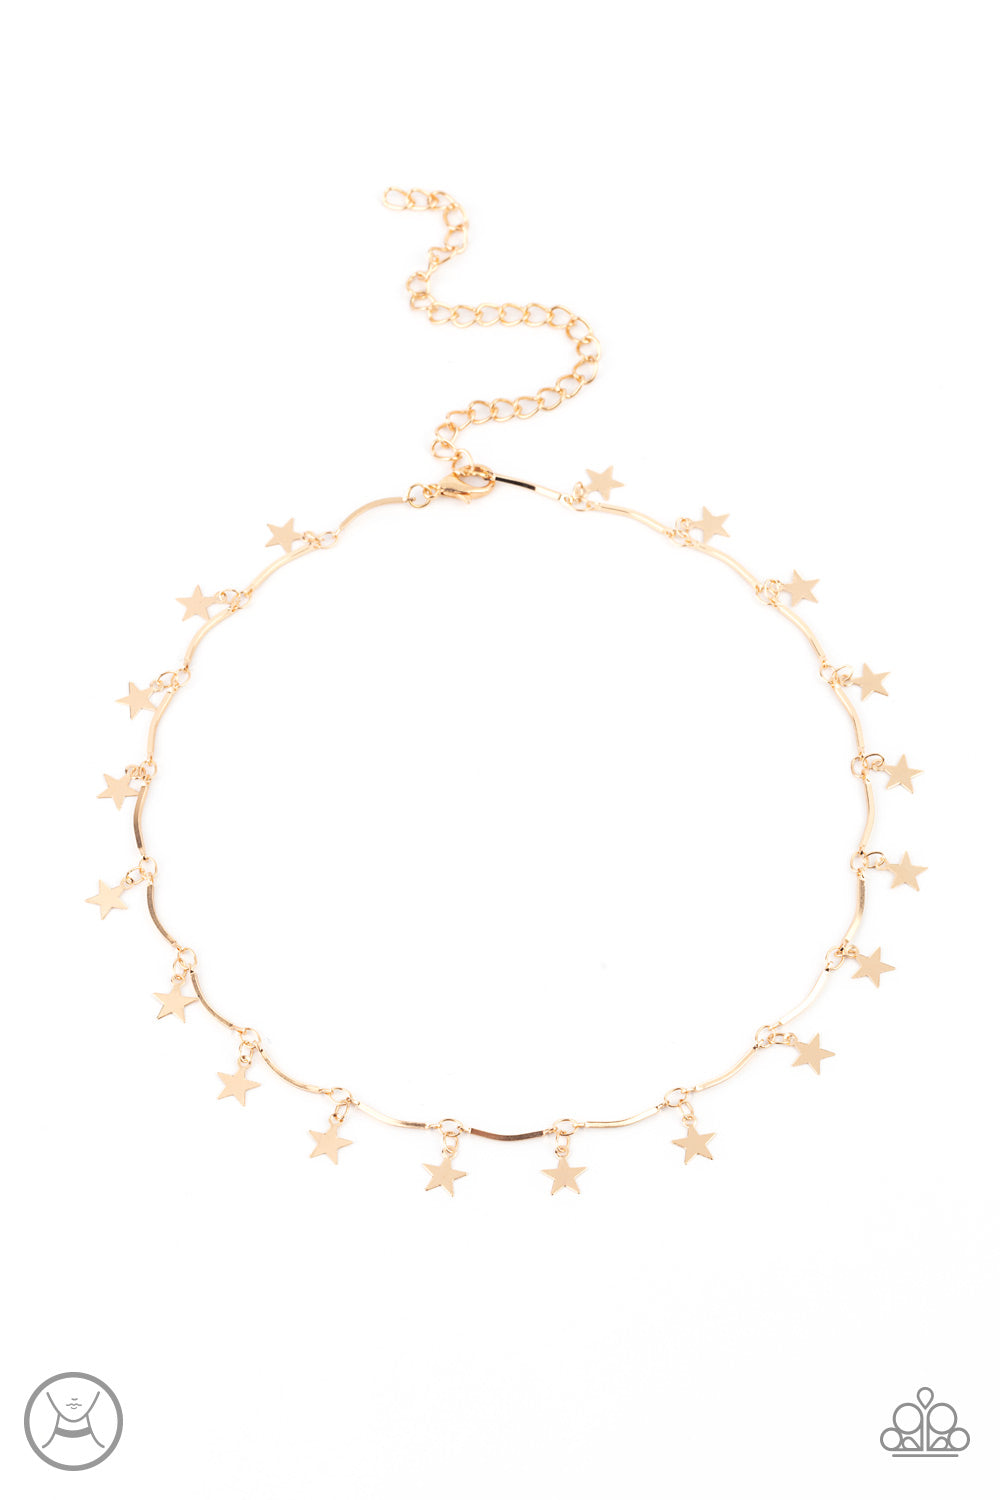 five-dollar-jewelry-little-miss-americana-gold-necklace-paparazzi-accessories